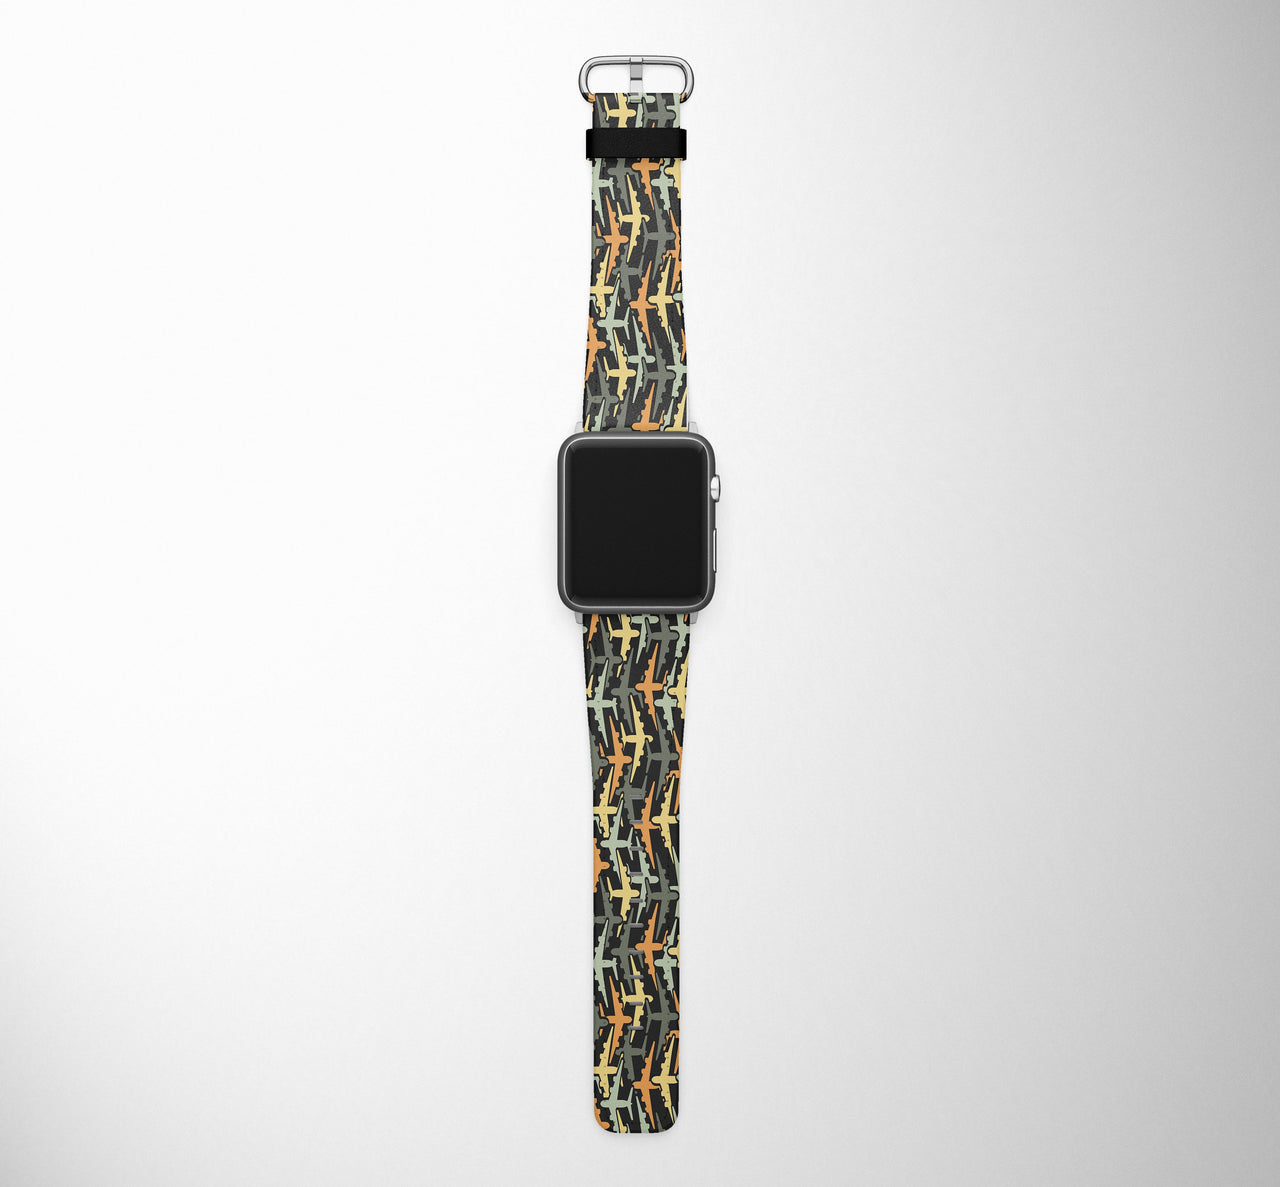 Volume 2 Super Colourful Airplanes Designed Leather Apple Watch Straps